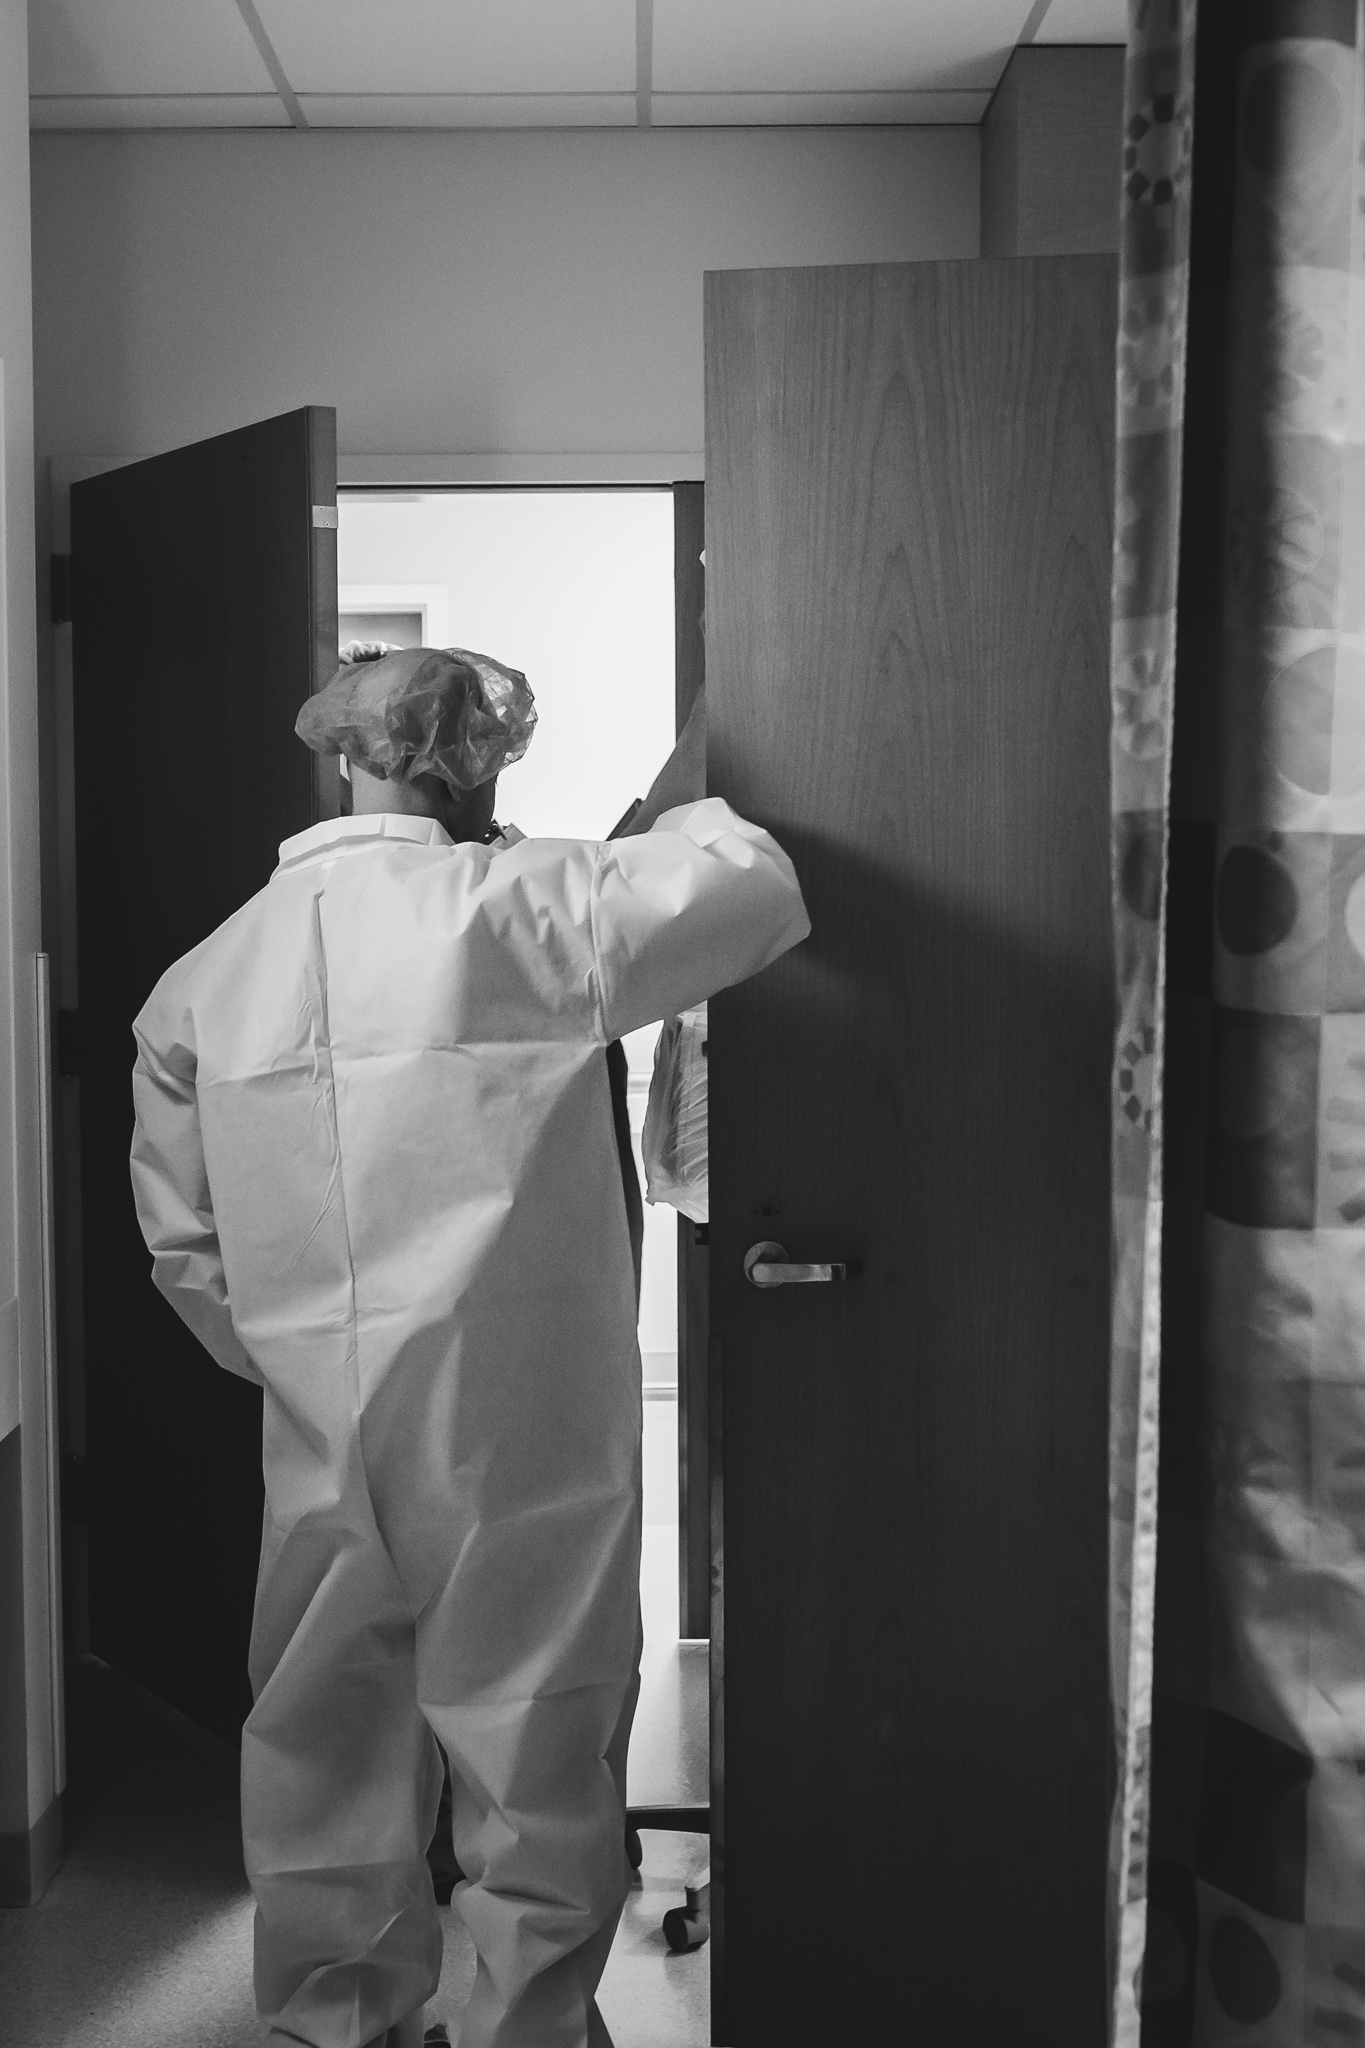 A man in surgery scrubs walks out of a hospital room. 